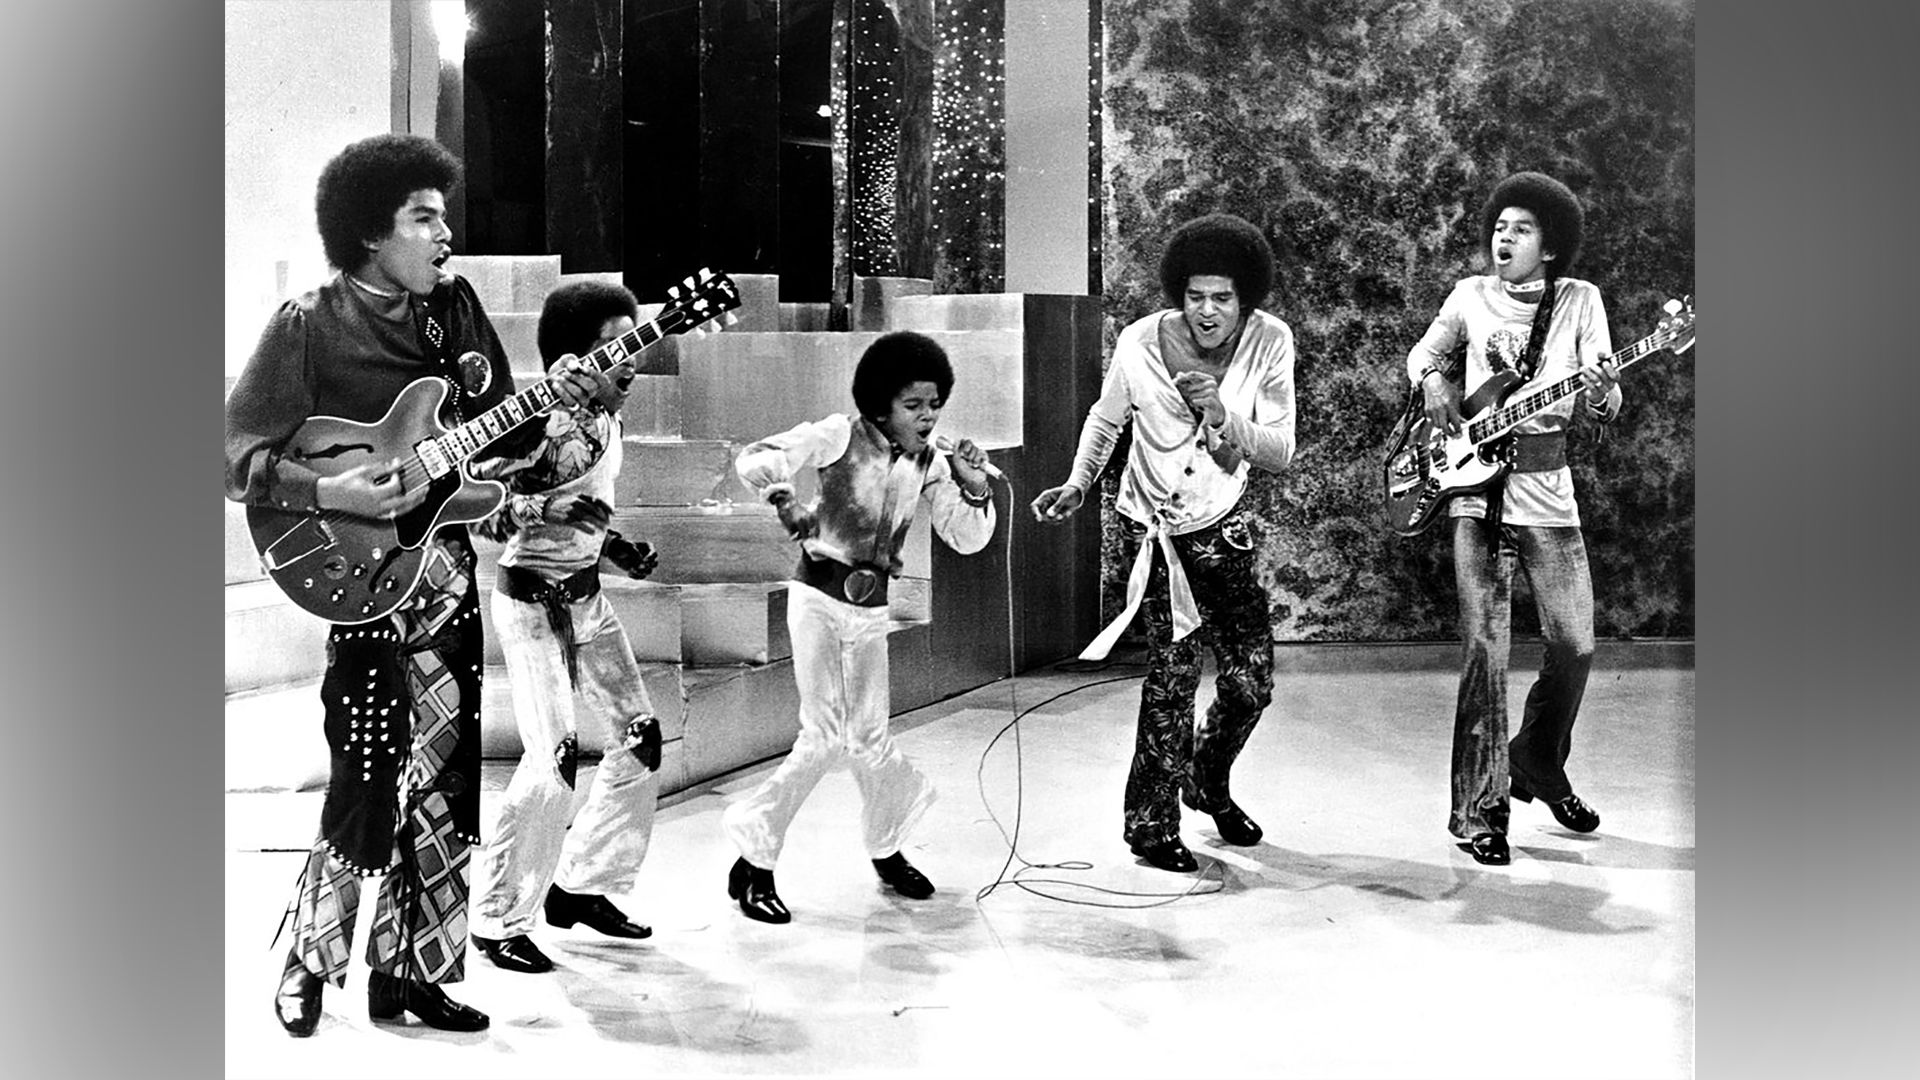 Young Michael Jackson already loved eccentric dances